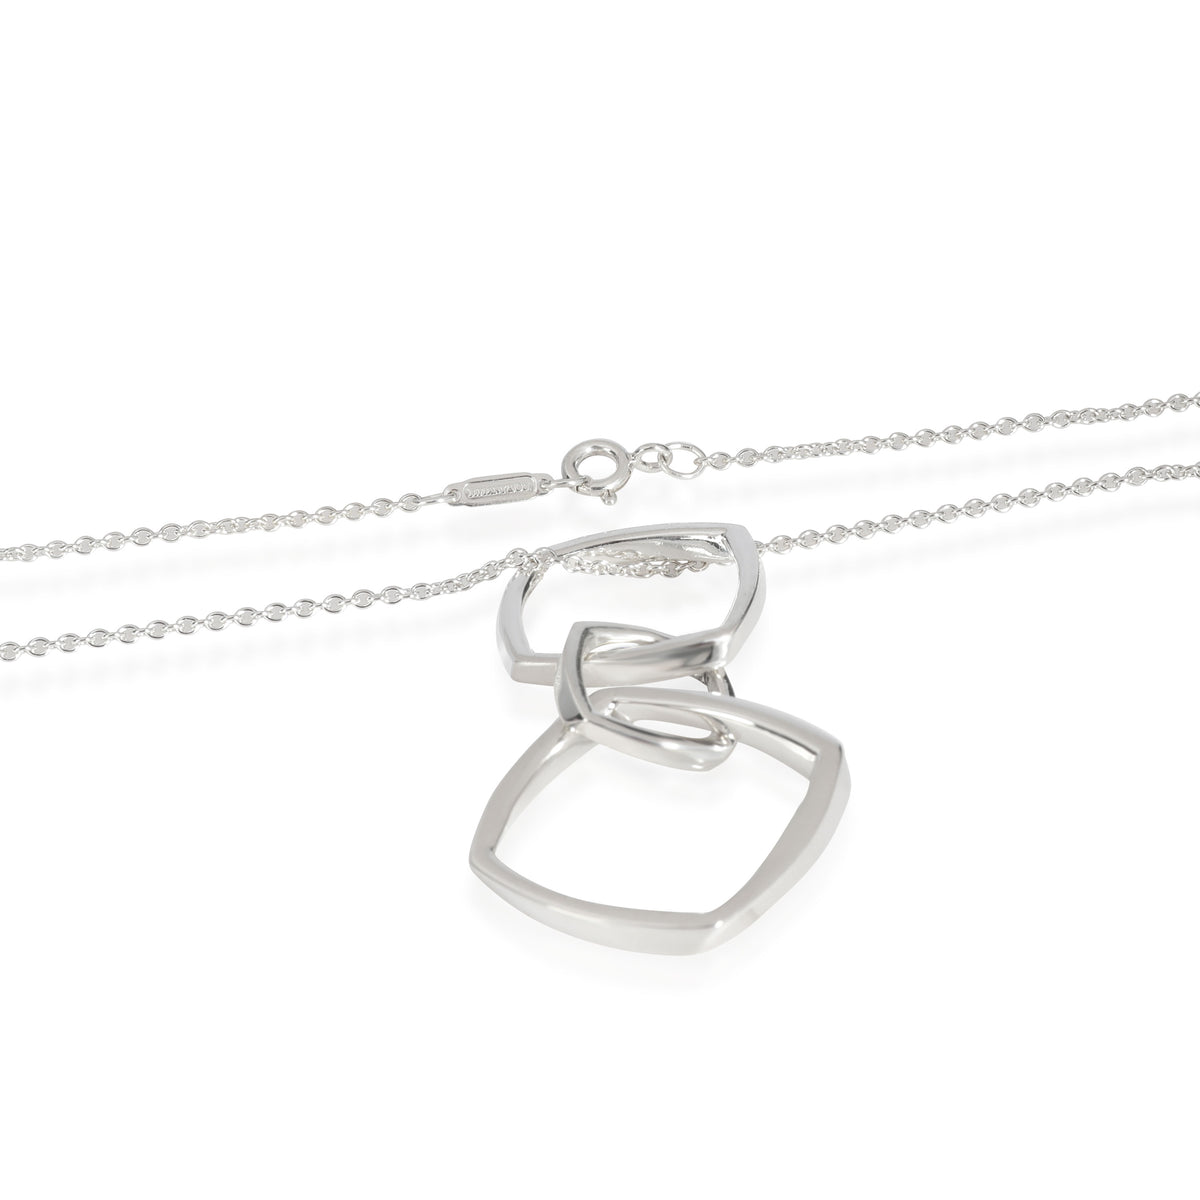 Tiffany & Co. Frank Gehry Torque Pendant in Sterling Silver